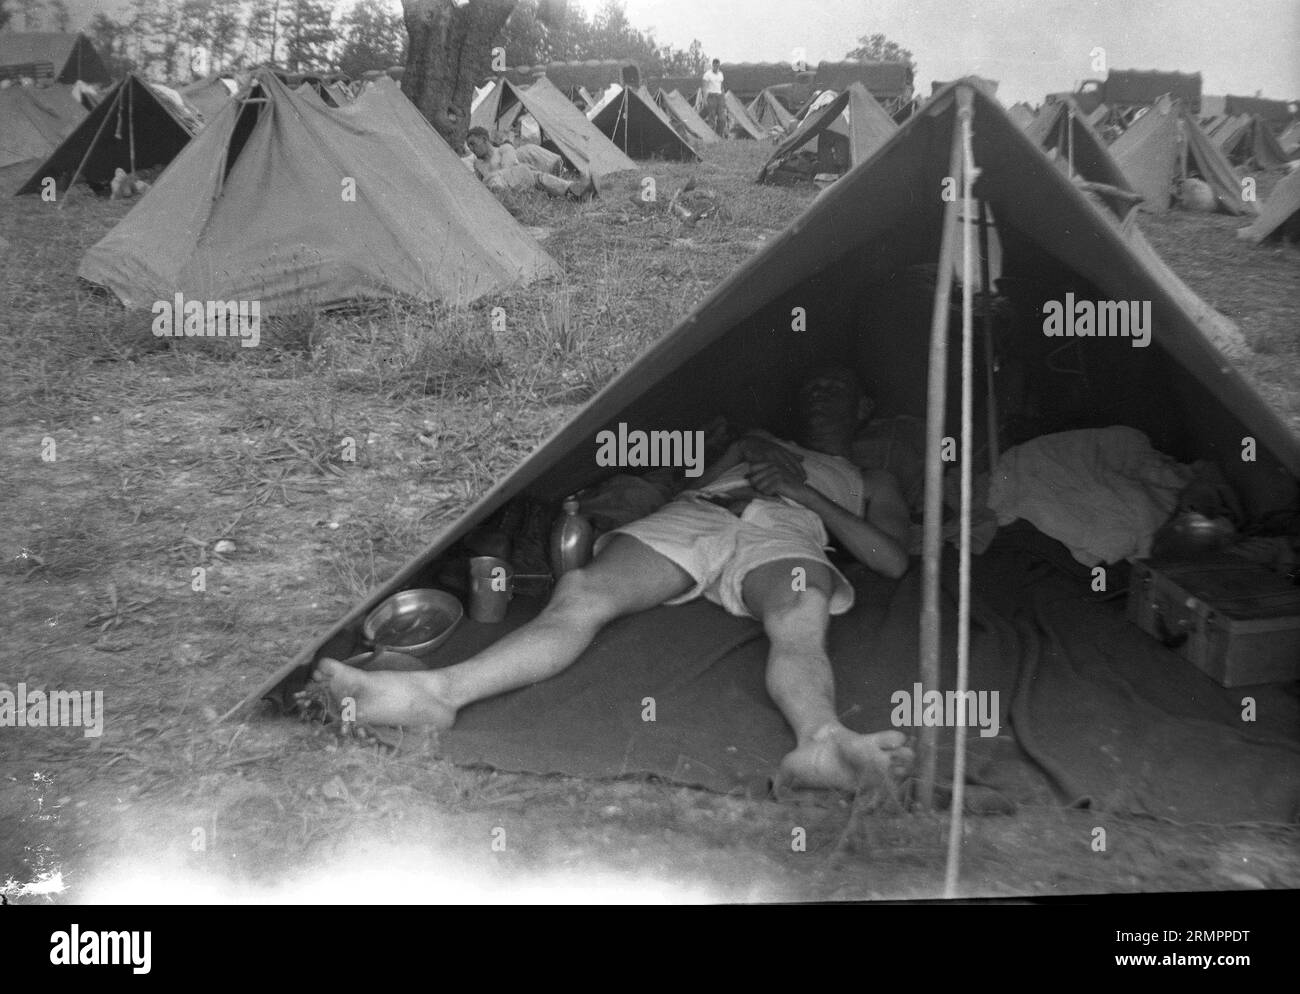 Soldier sleeping in army tent at tent camp. Members of the United States Army’s 114th infantry division train to fight against Germany in Europe during WWII. Stock Photo